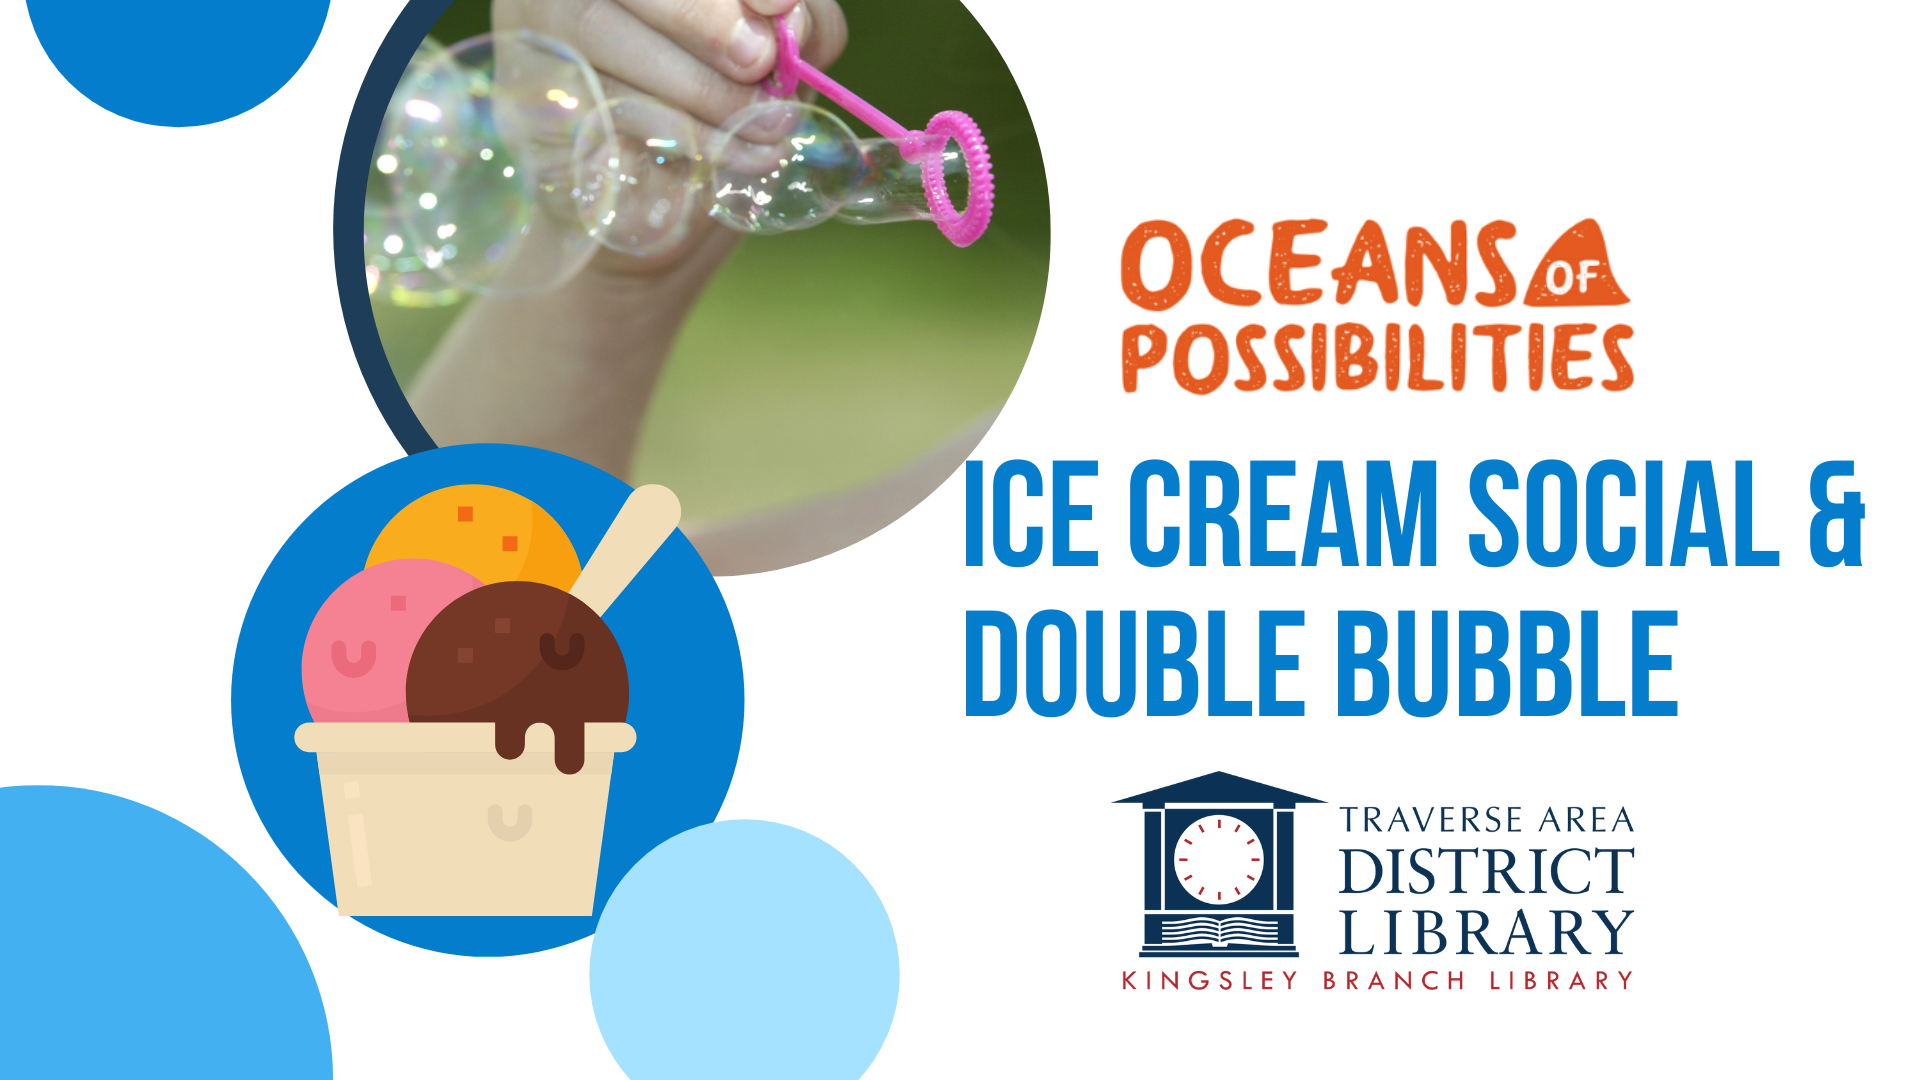 Images of child blowing bubbles and a bowl of ice cream.